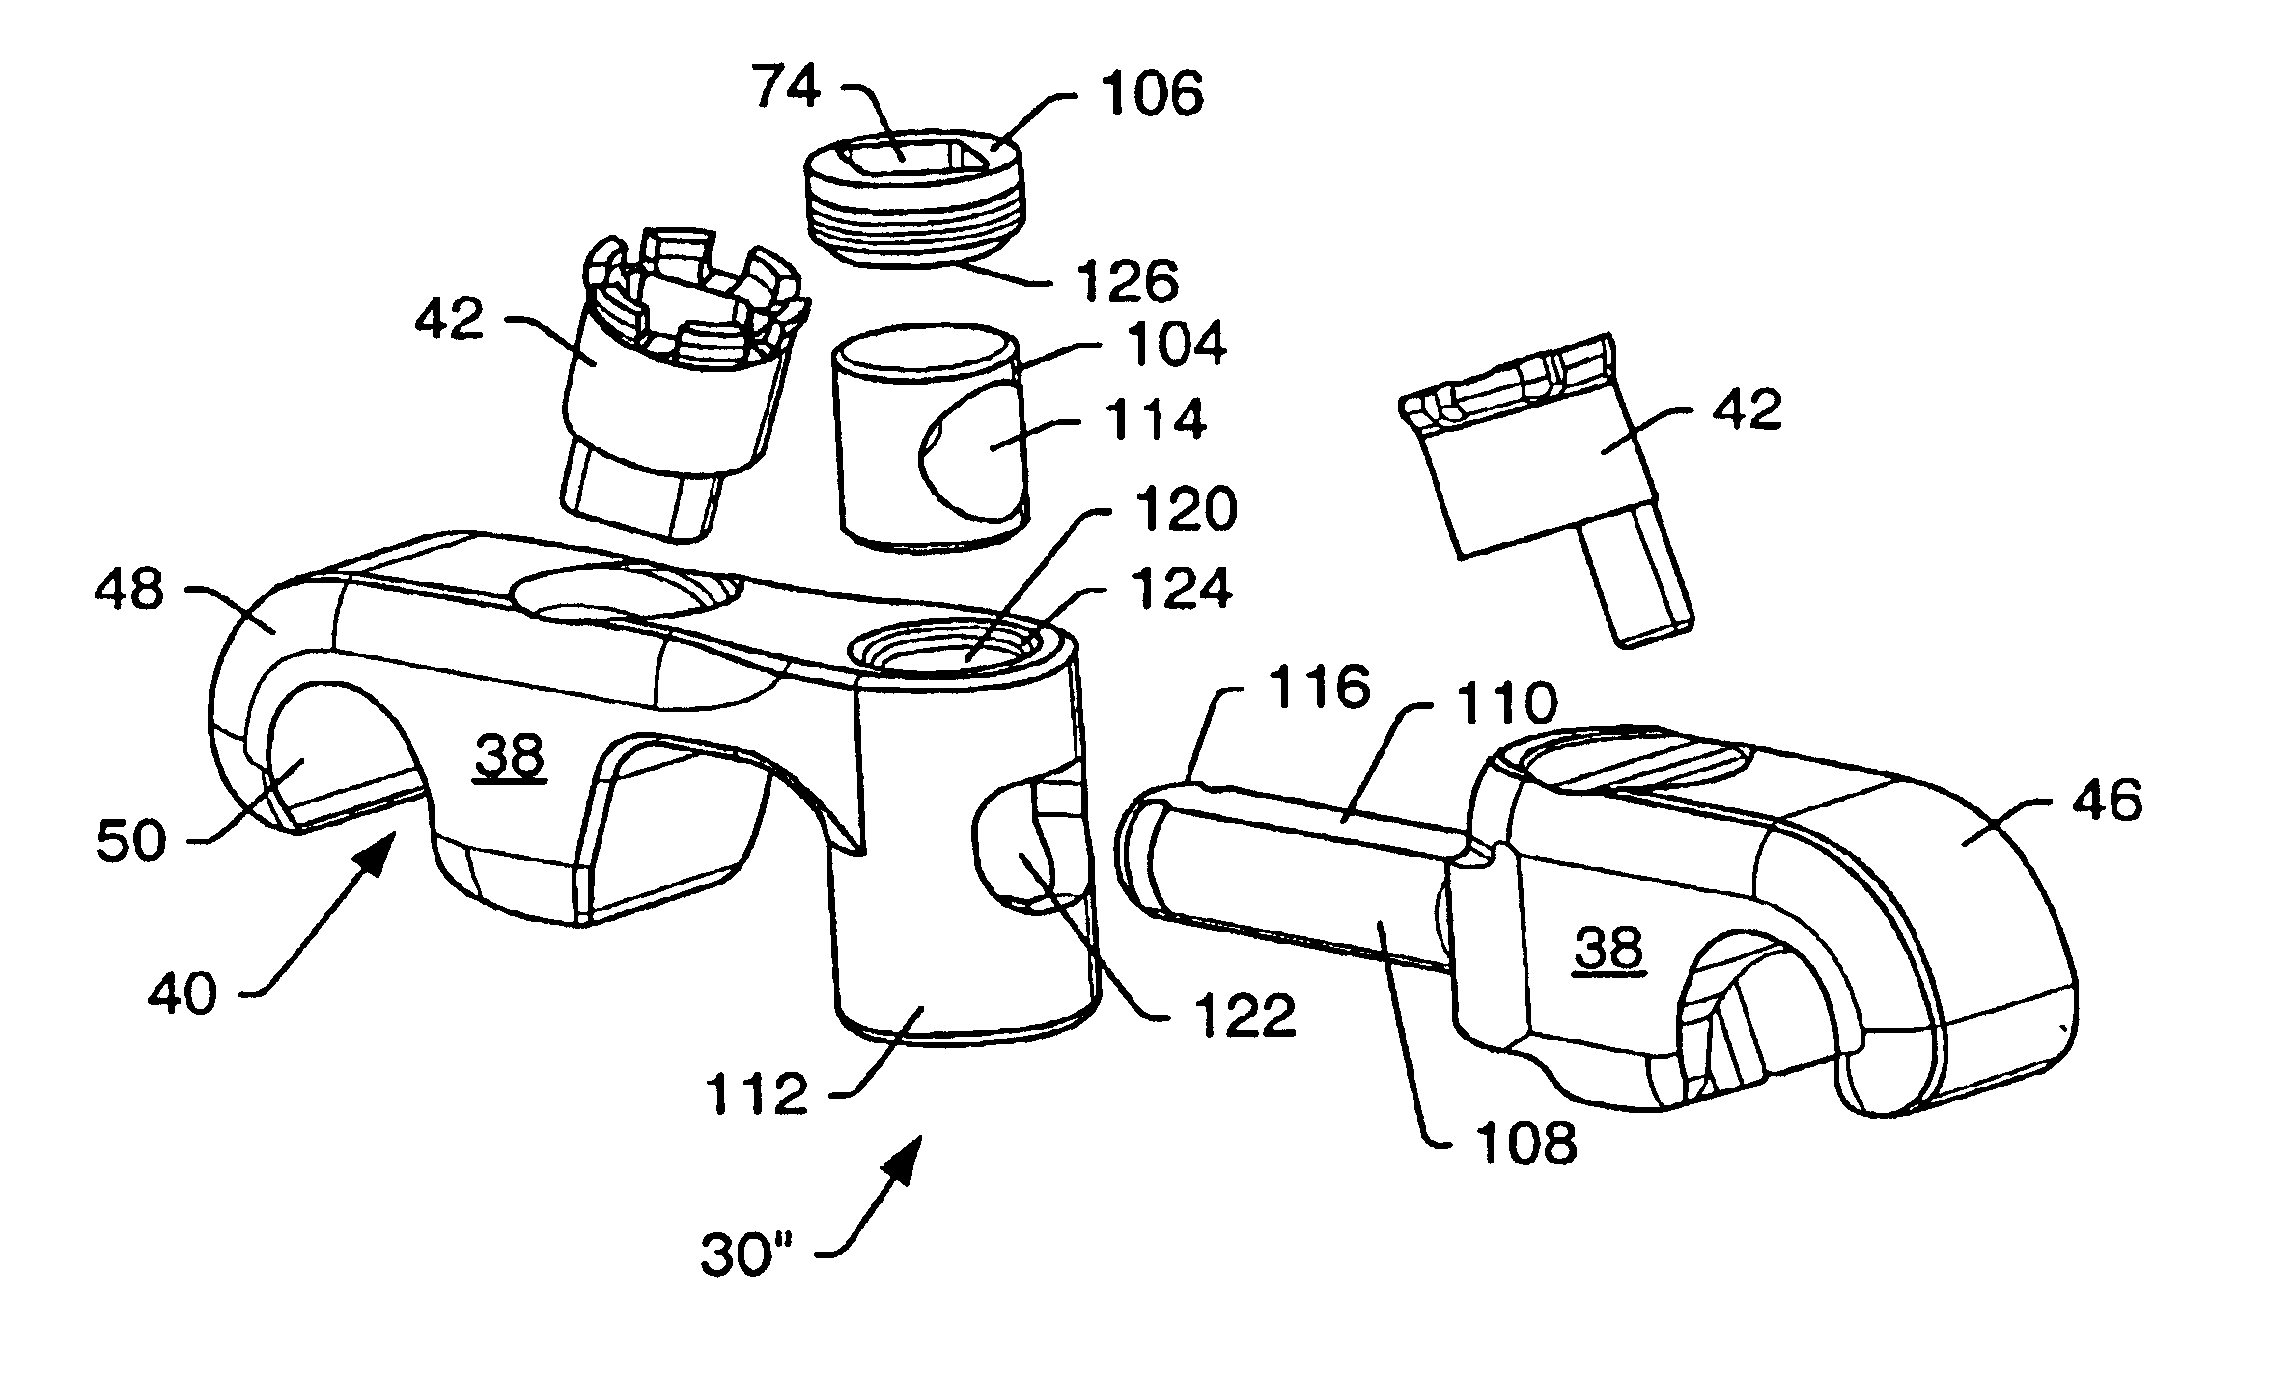 Adjustable transverse connector with cam activated engagers